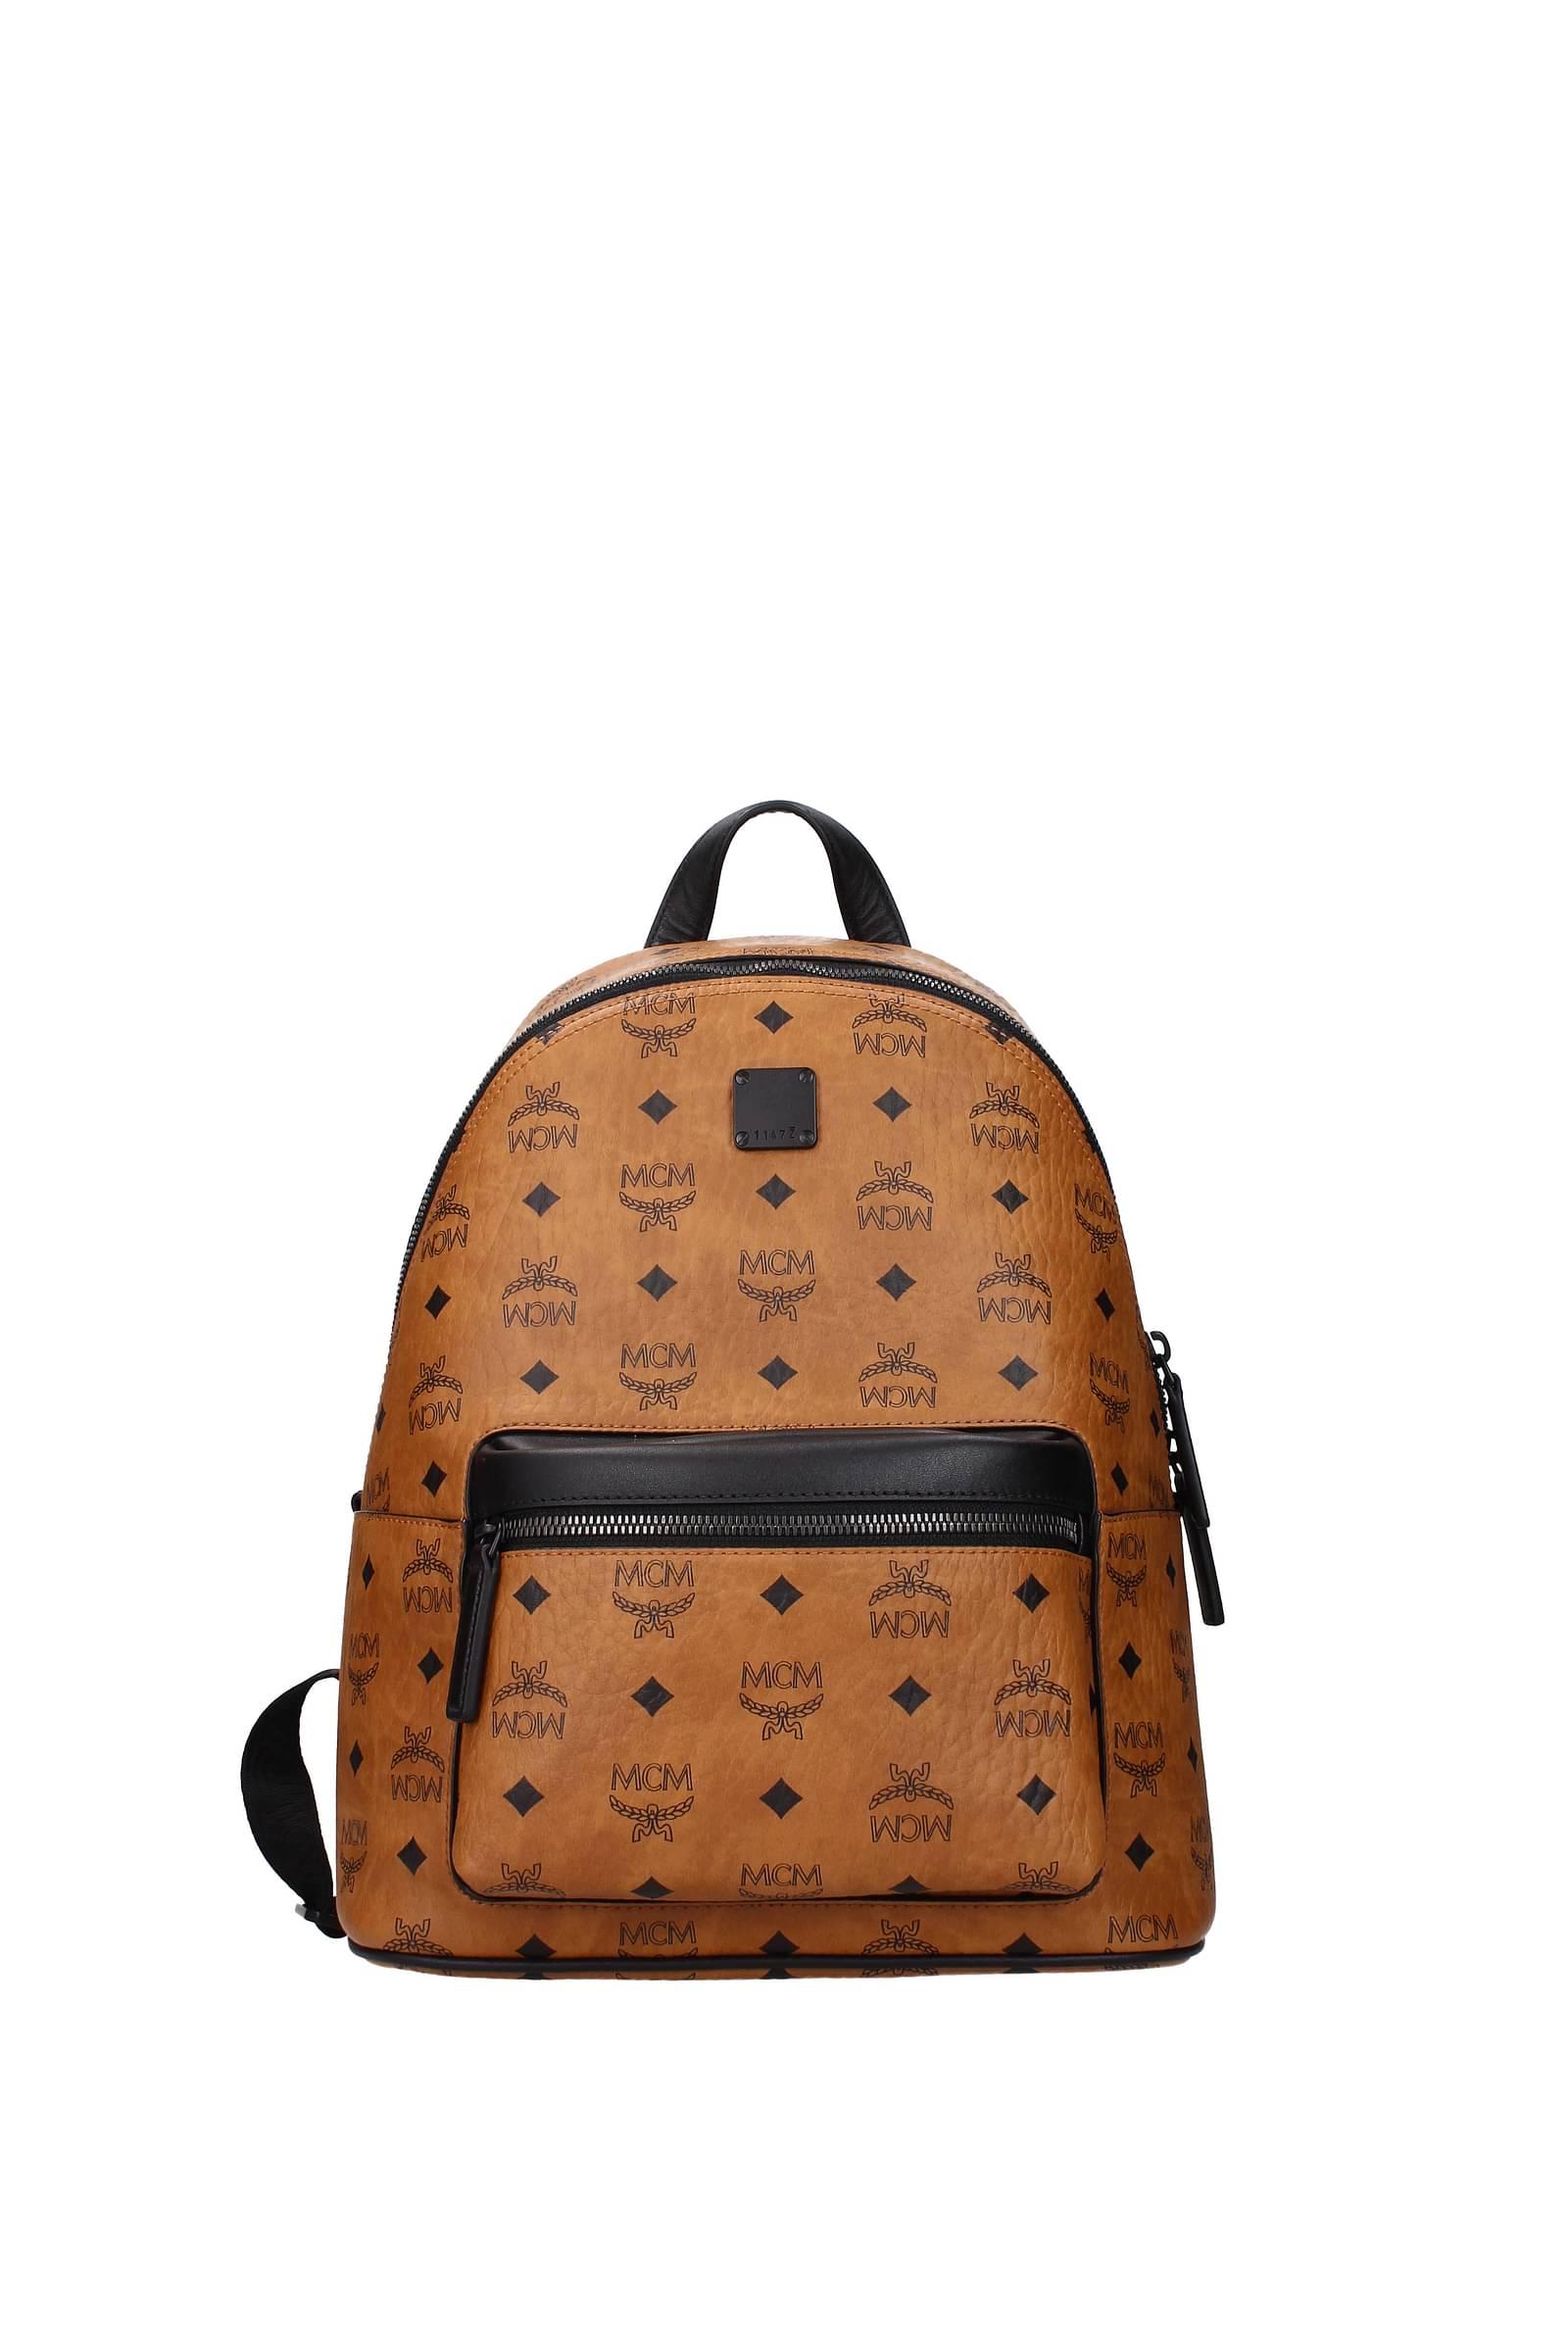 MCM Backpack And Bumbags Leather Brown Cognac for Men